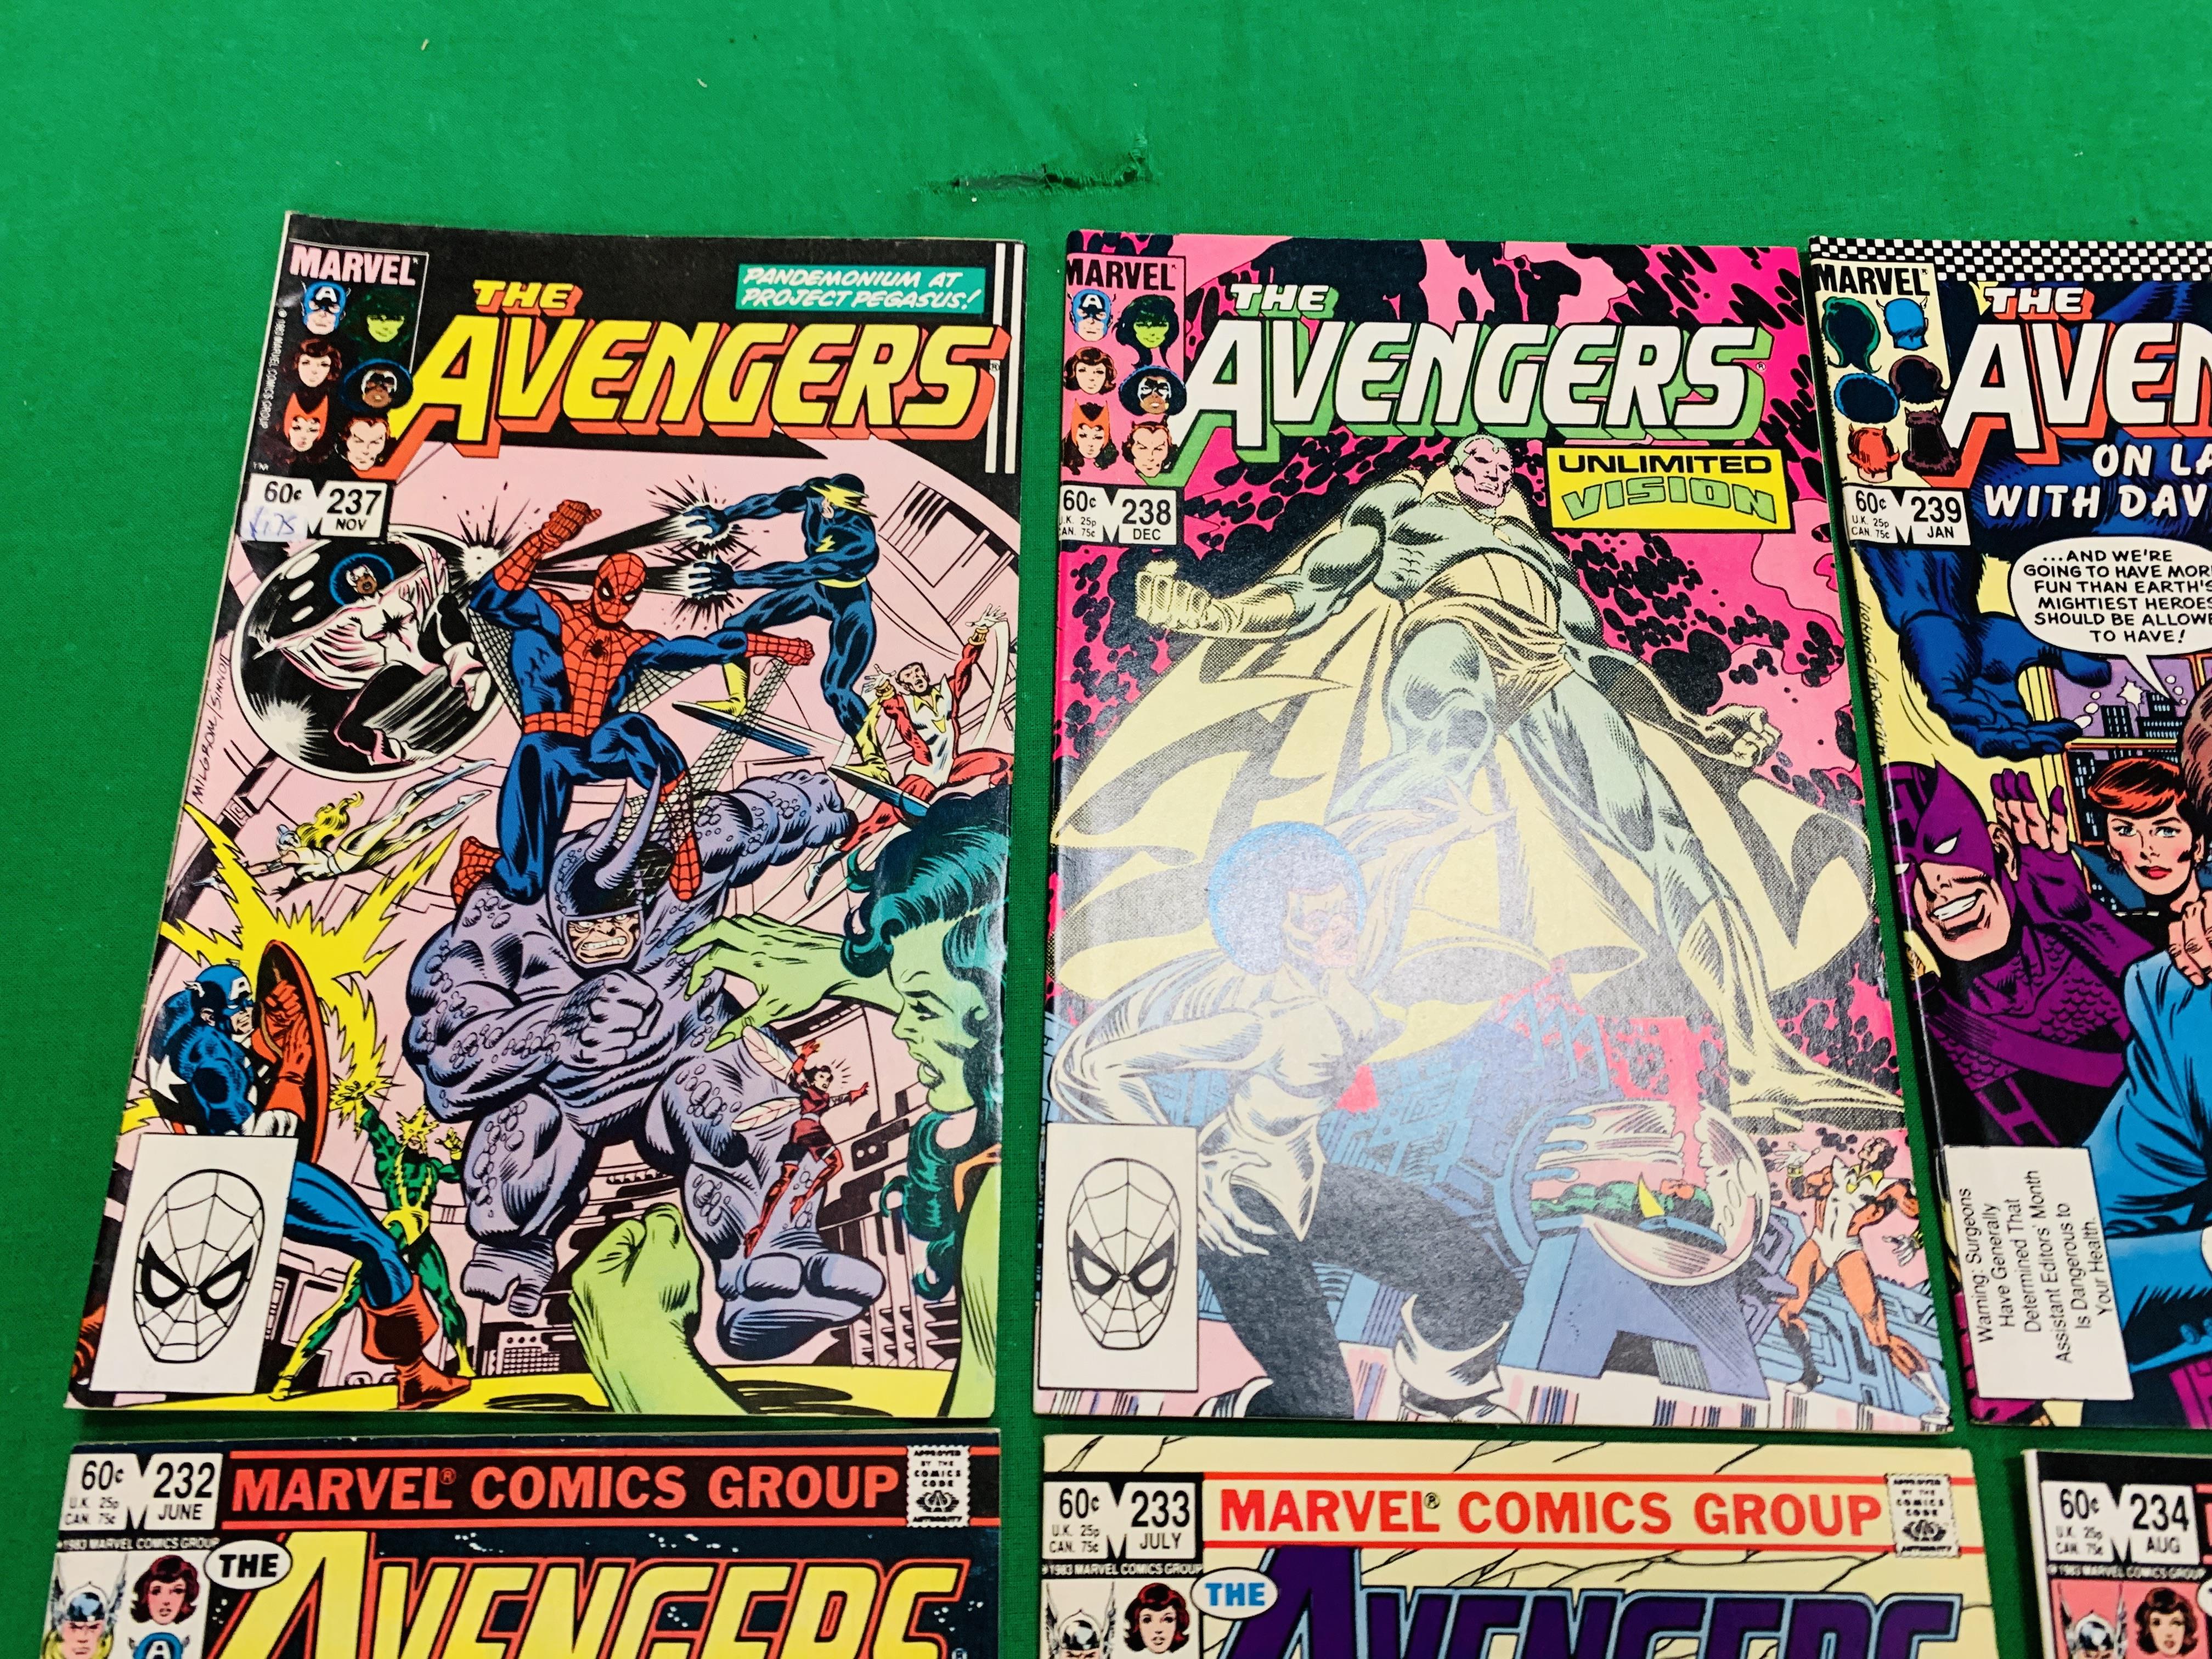 MARVEL COMICS THE AVENGERS NO. 101 - 299, MISSING ISSUES 103 AND 110. - Image 96 of 130